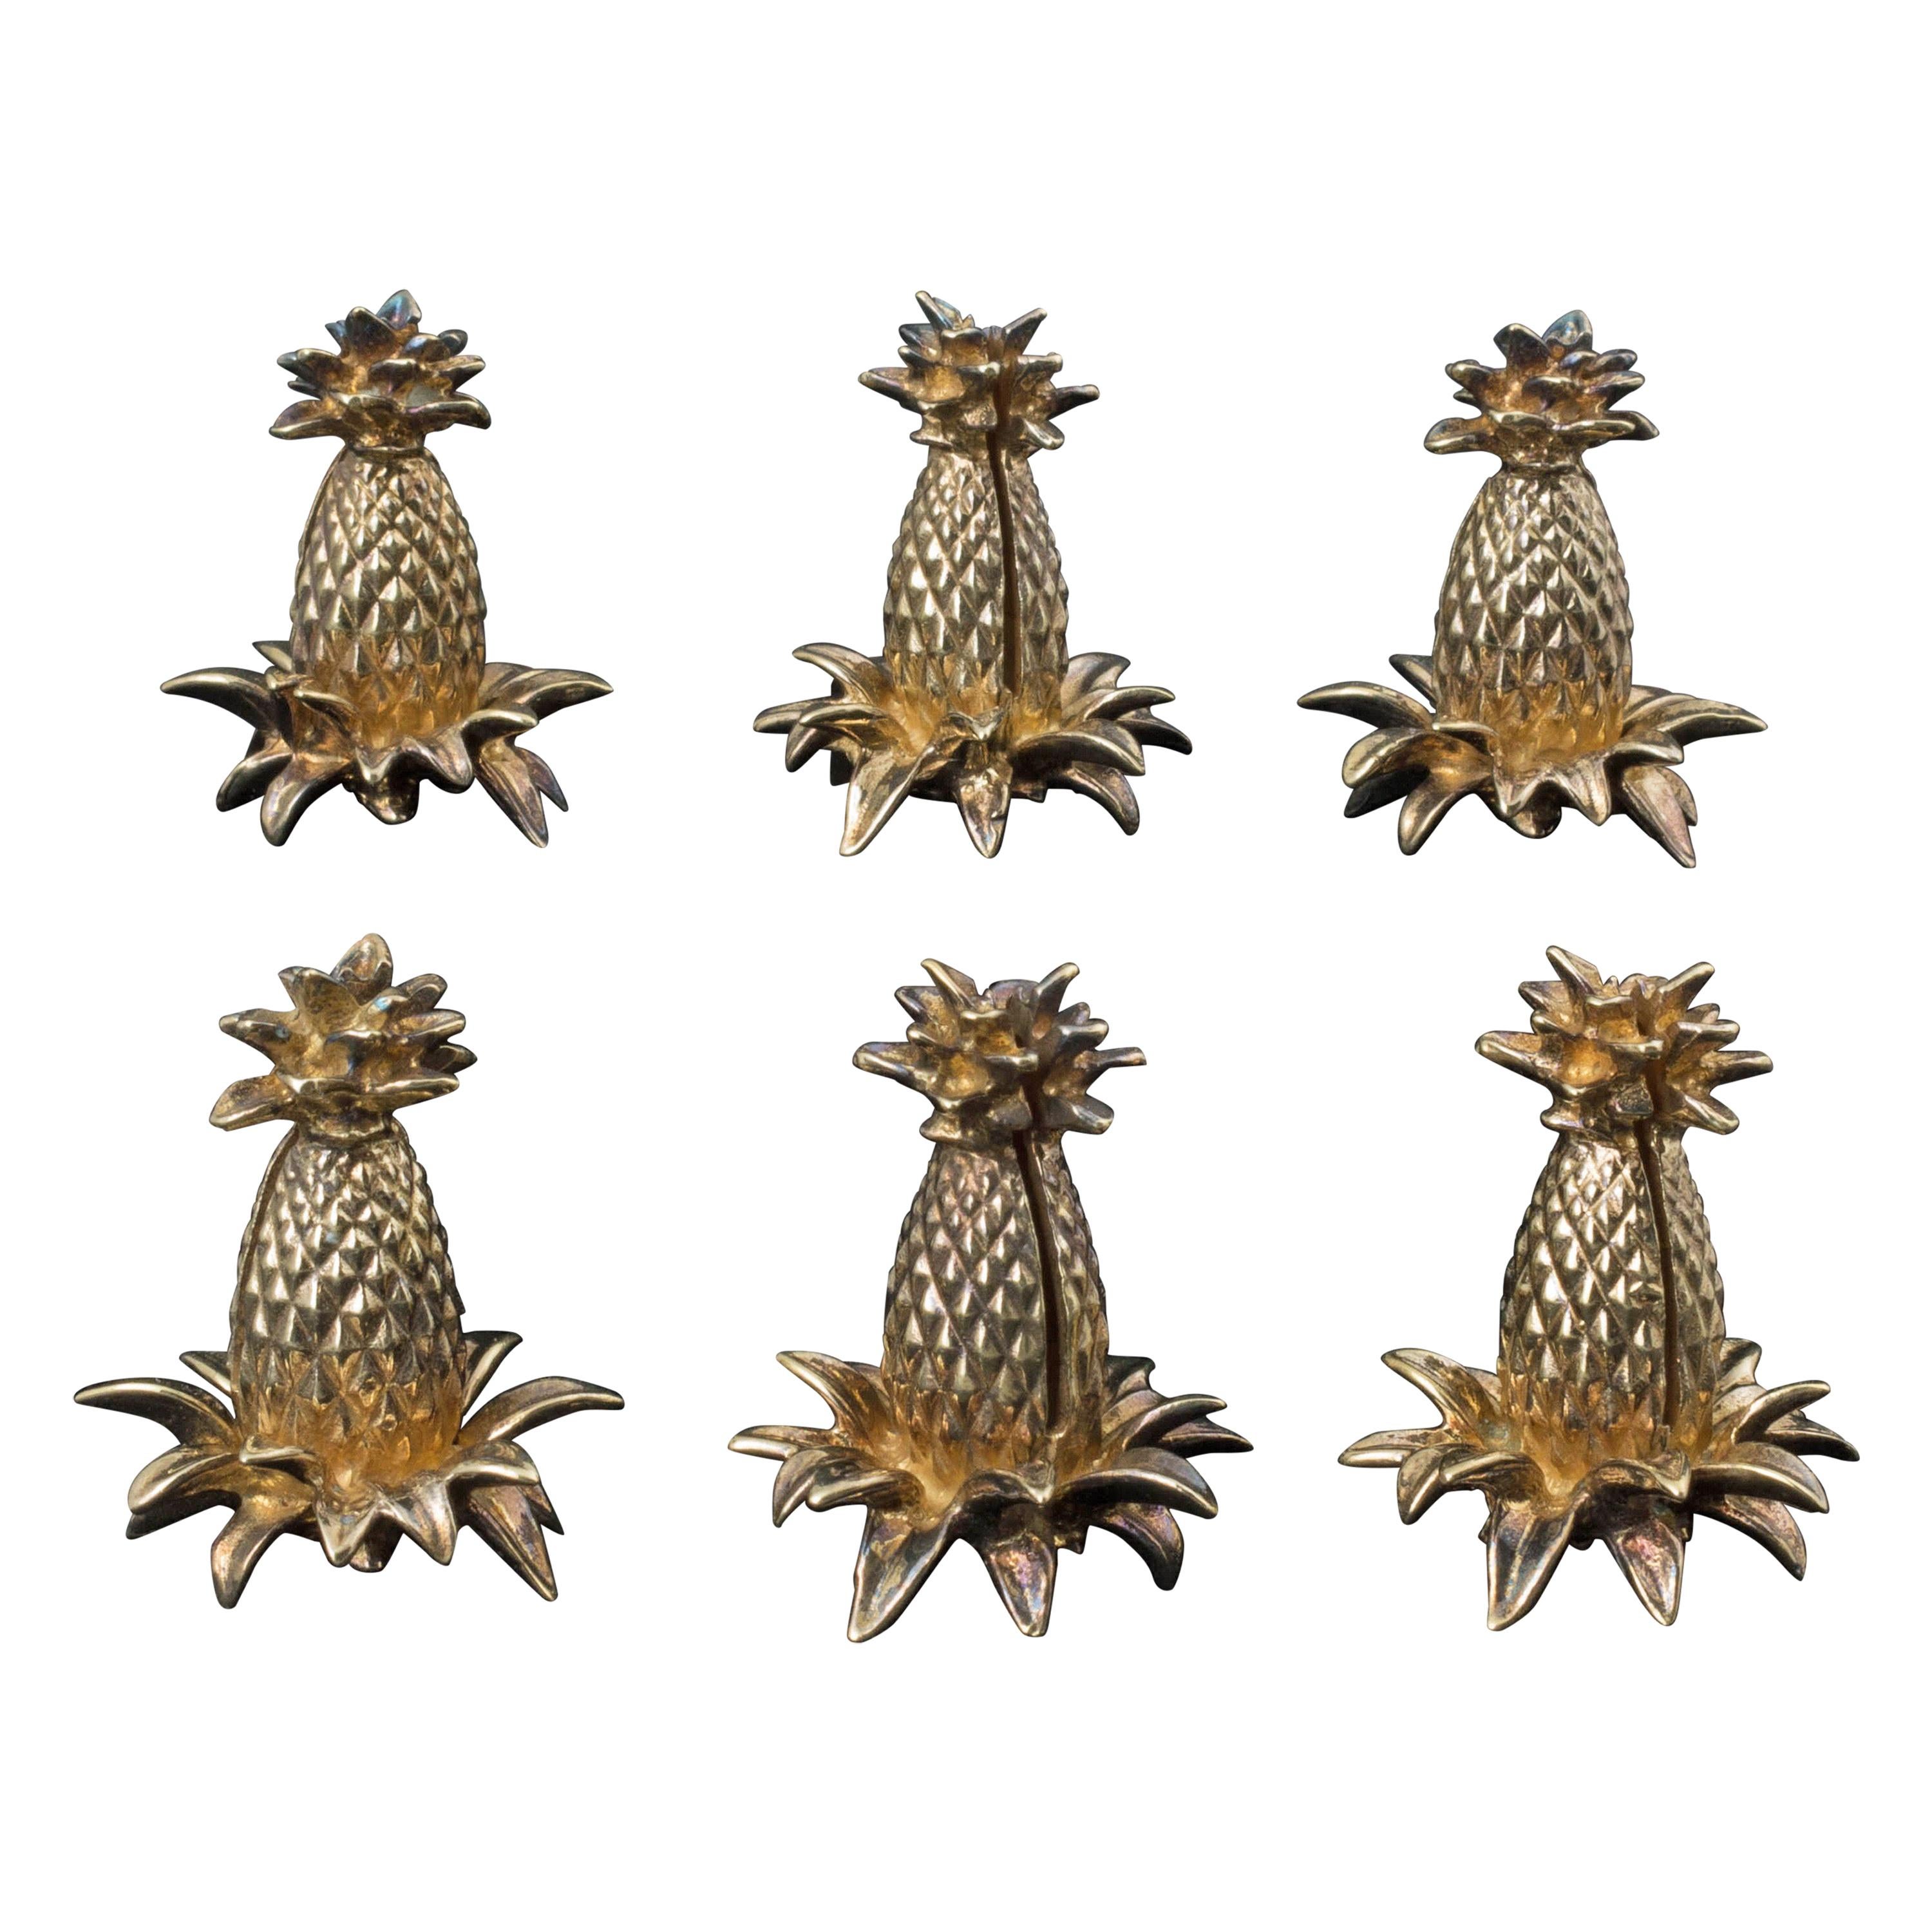 Vintage 1940s Tiffany & Co. Gilt Silver Pineapple Place Card Holders, Set of 6